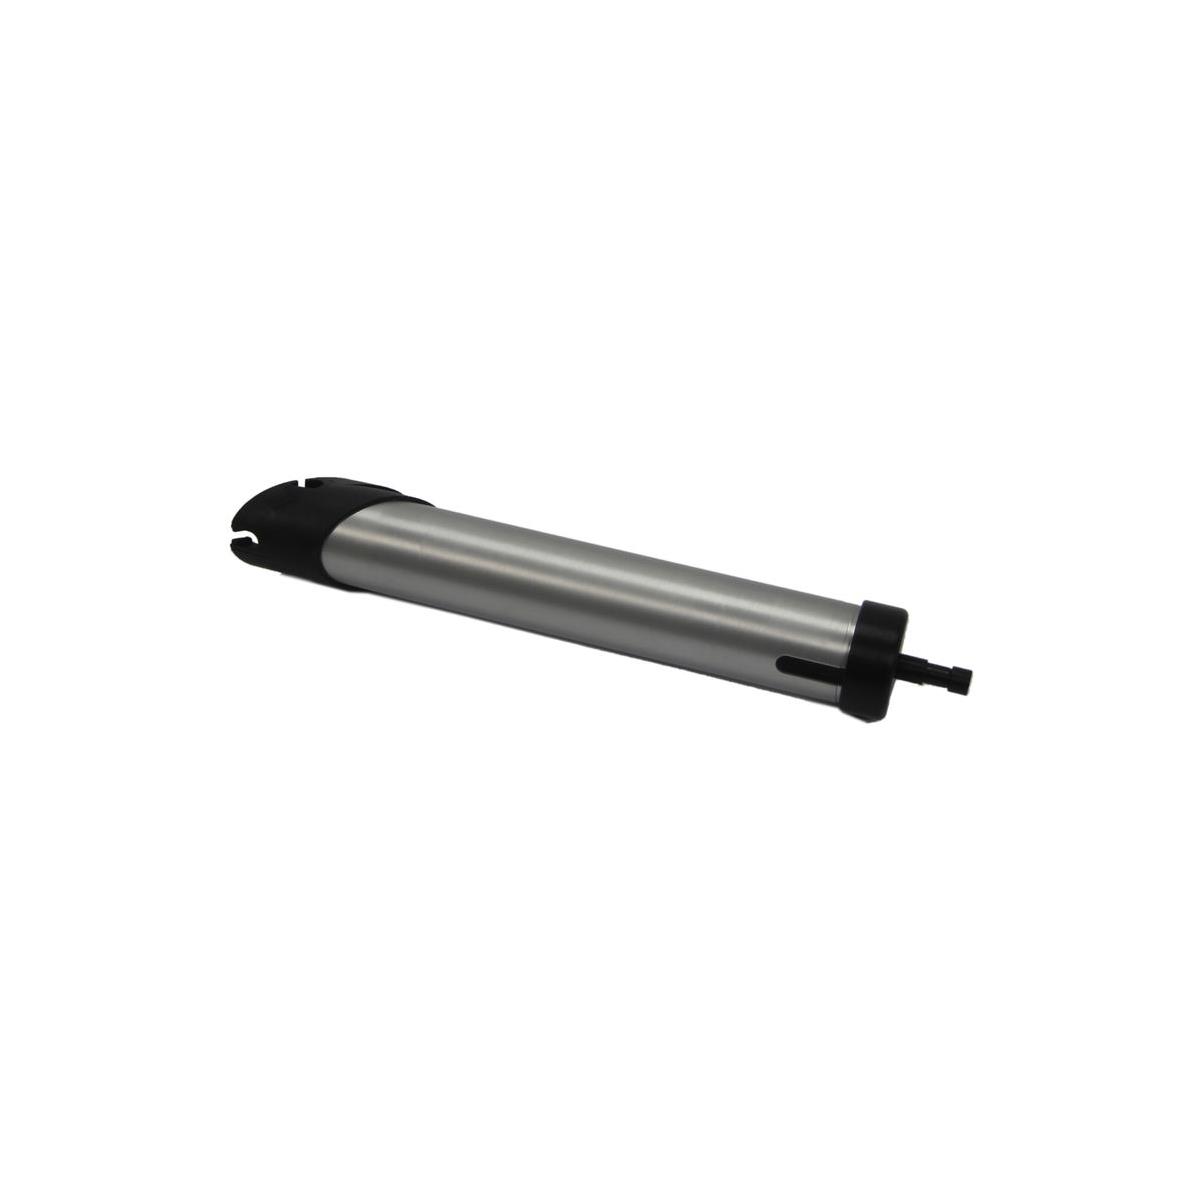 Image of K 5600 Lighting Focus Tube with Baby Pin for Kurve 3 Parabolic Reflector